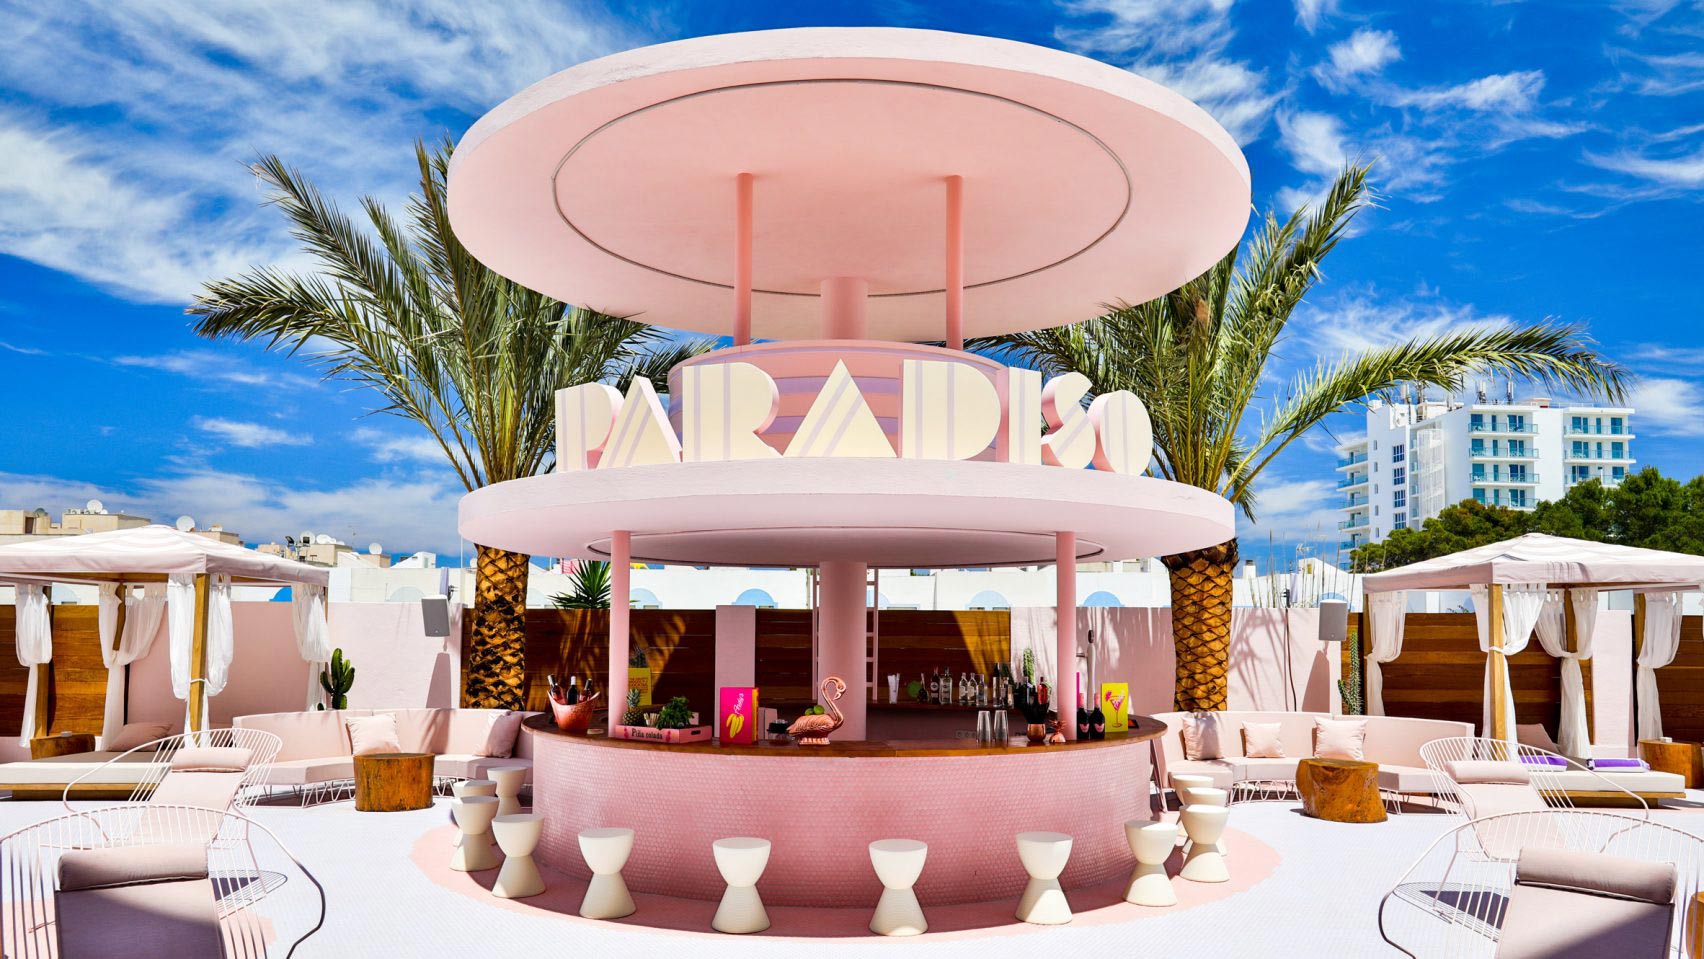 Hotel beach bar designed in Miami style with a signage name Paradiso